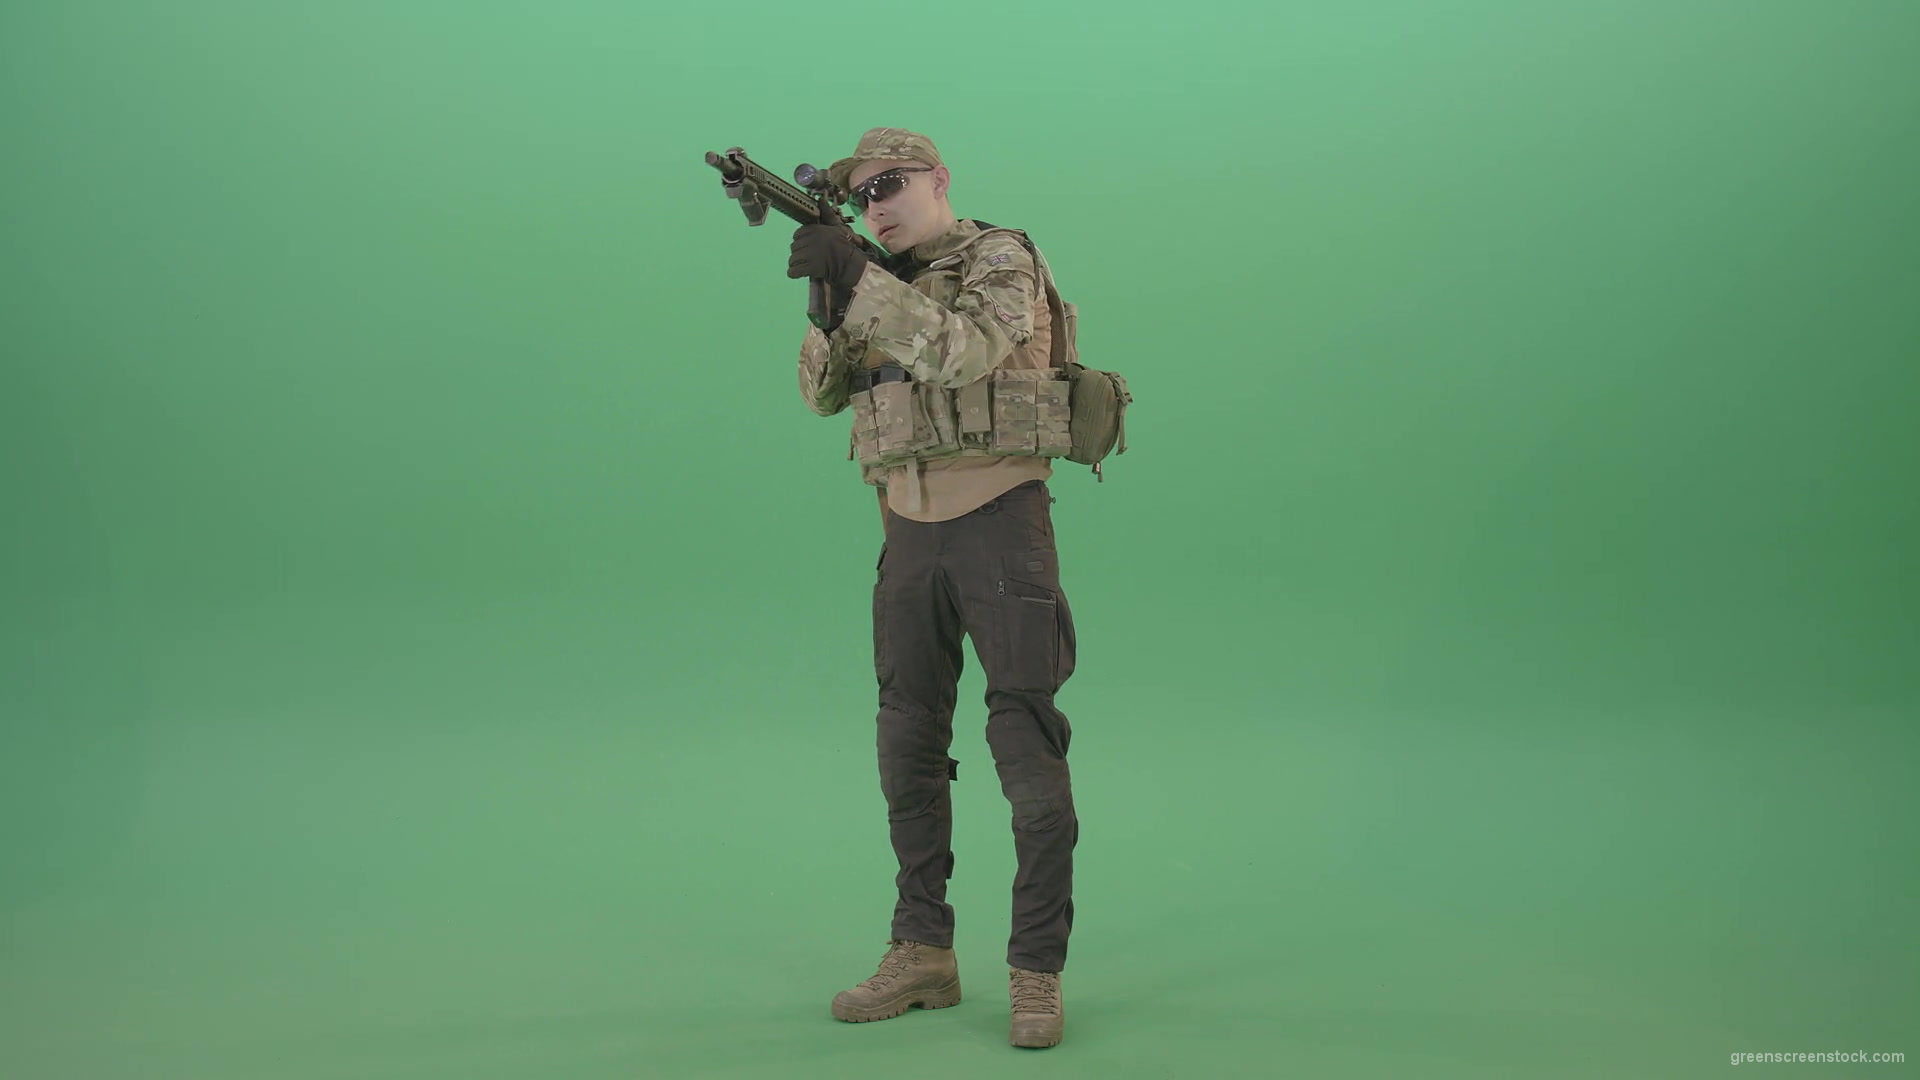 Counter-strike-army-police-man-shooting-enemy-from-machine-gun-in-Camouflage-uniform-on-green-screen-4K-Video-Footage-1920_004 Green Screen Stock